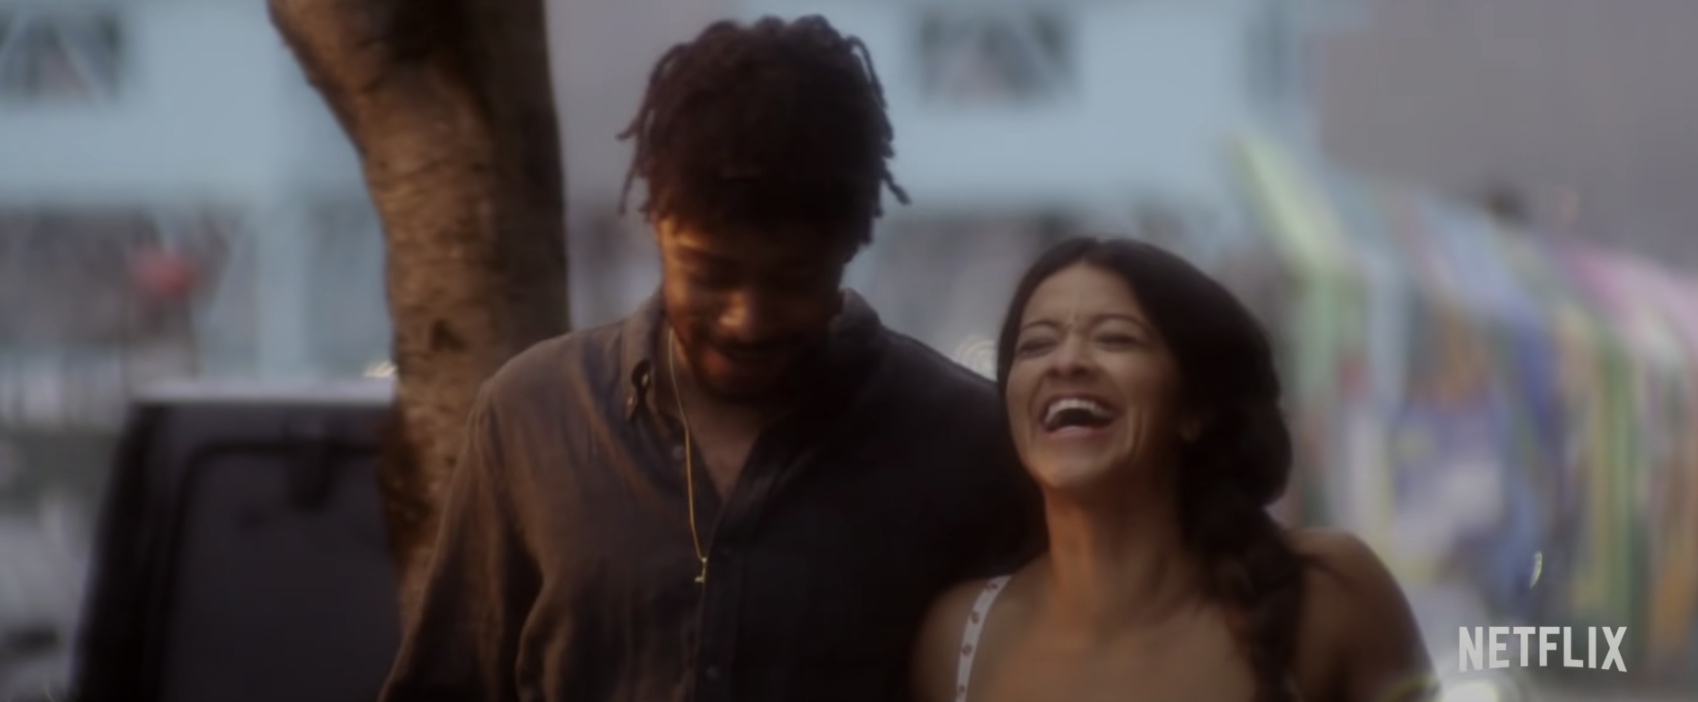 Lakeith and Gina laughing in someone great